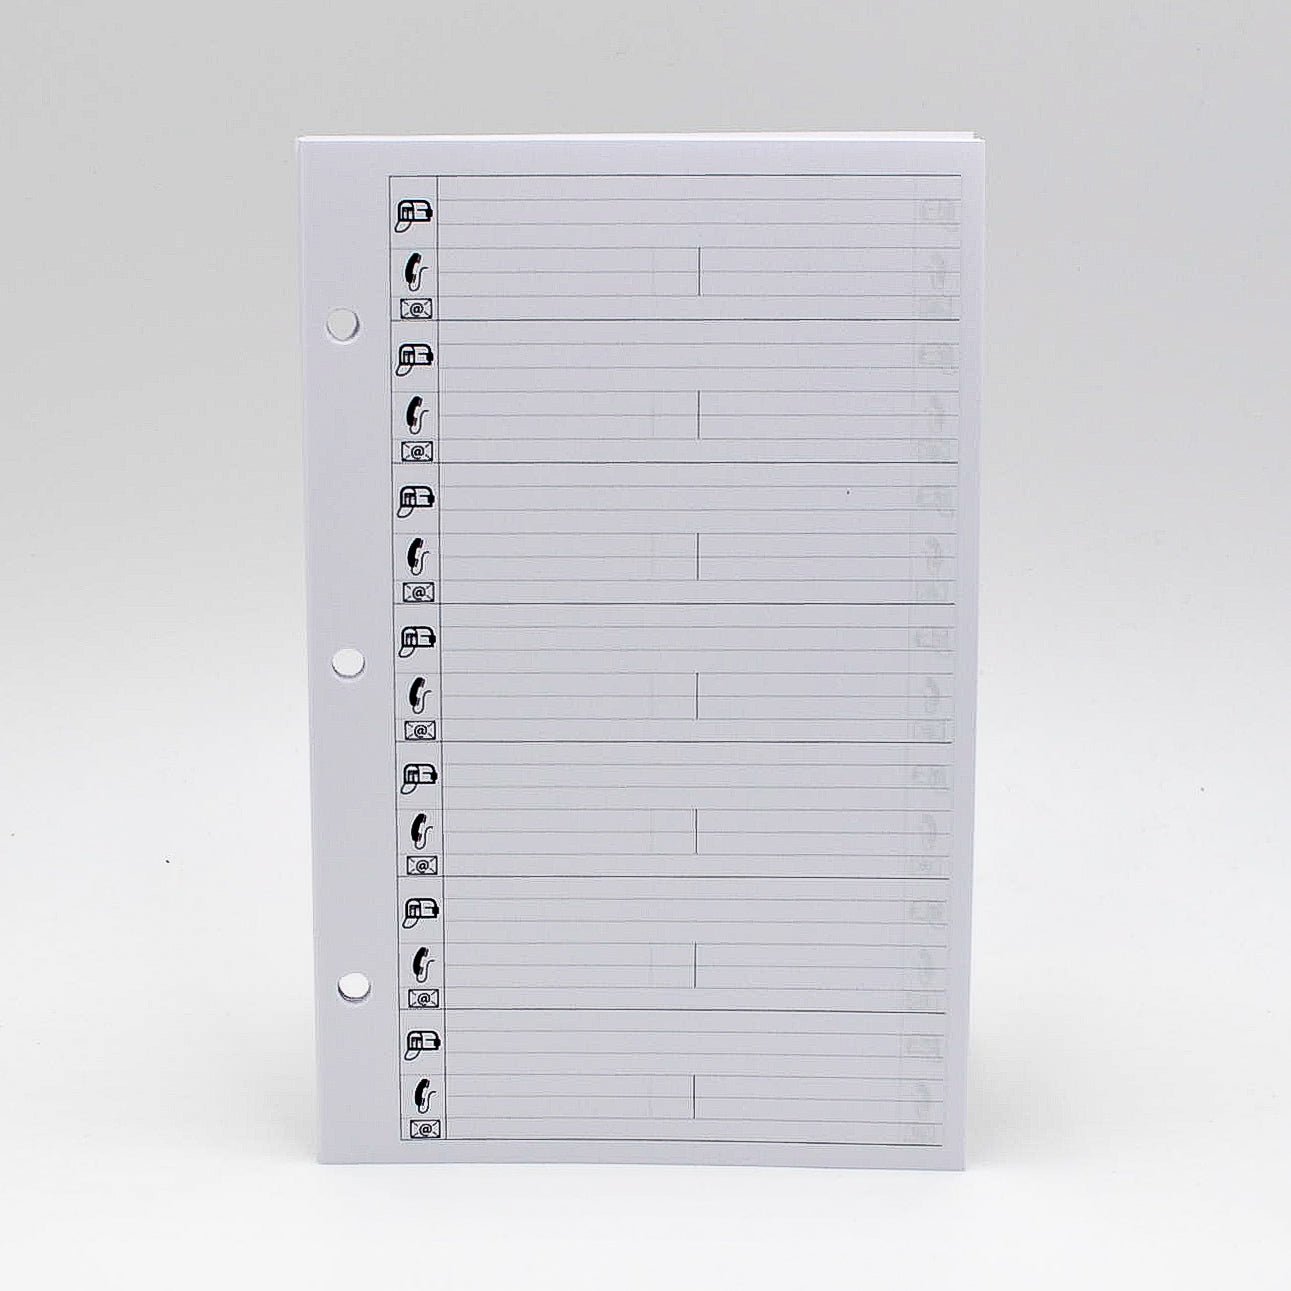 Supplemental Combo: MS58P 5 3/8"x 8 1/2" 3-Hole/7-Hole To-do/Address/Ruled Note Sheets   46 sheets (96 pages). The supplemental has 20 ruled, 24 to-do and 54 address pages.